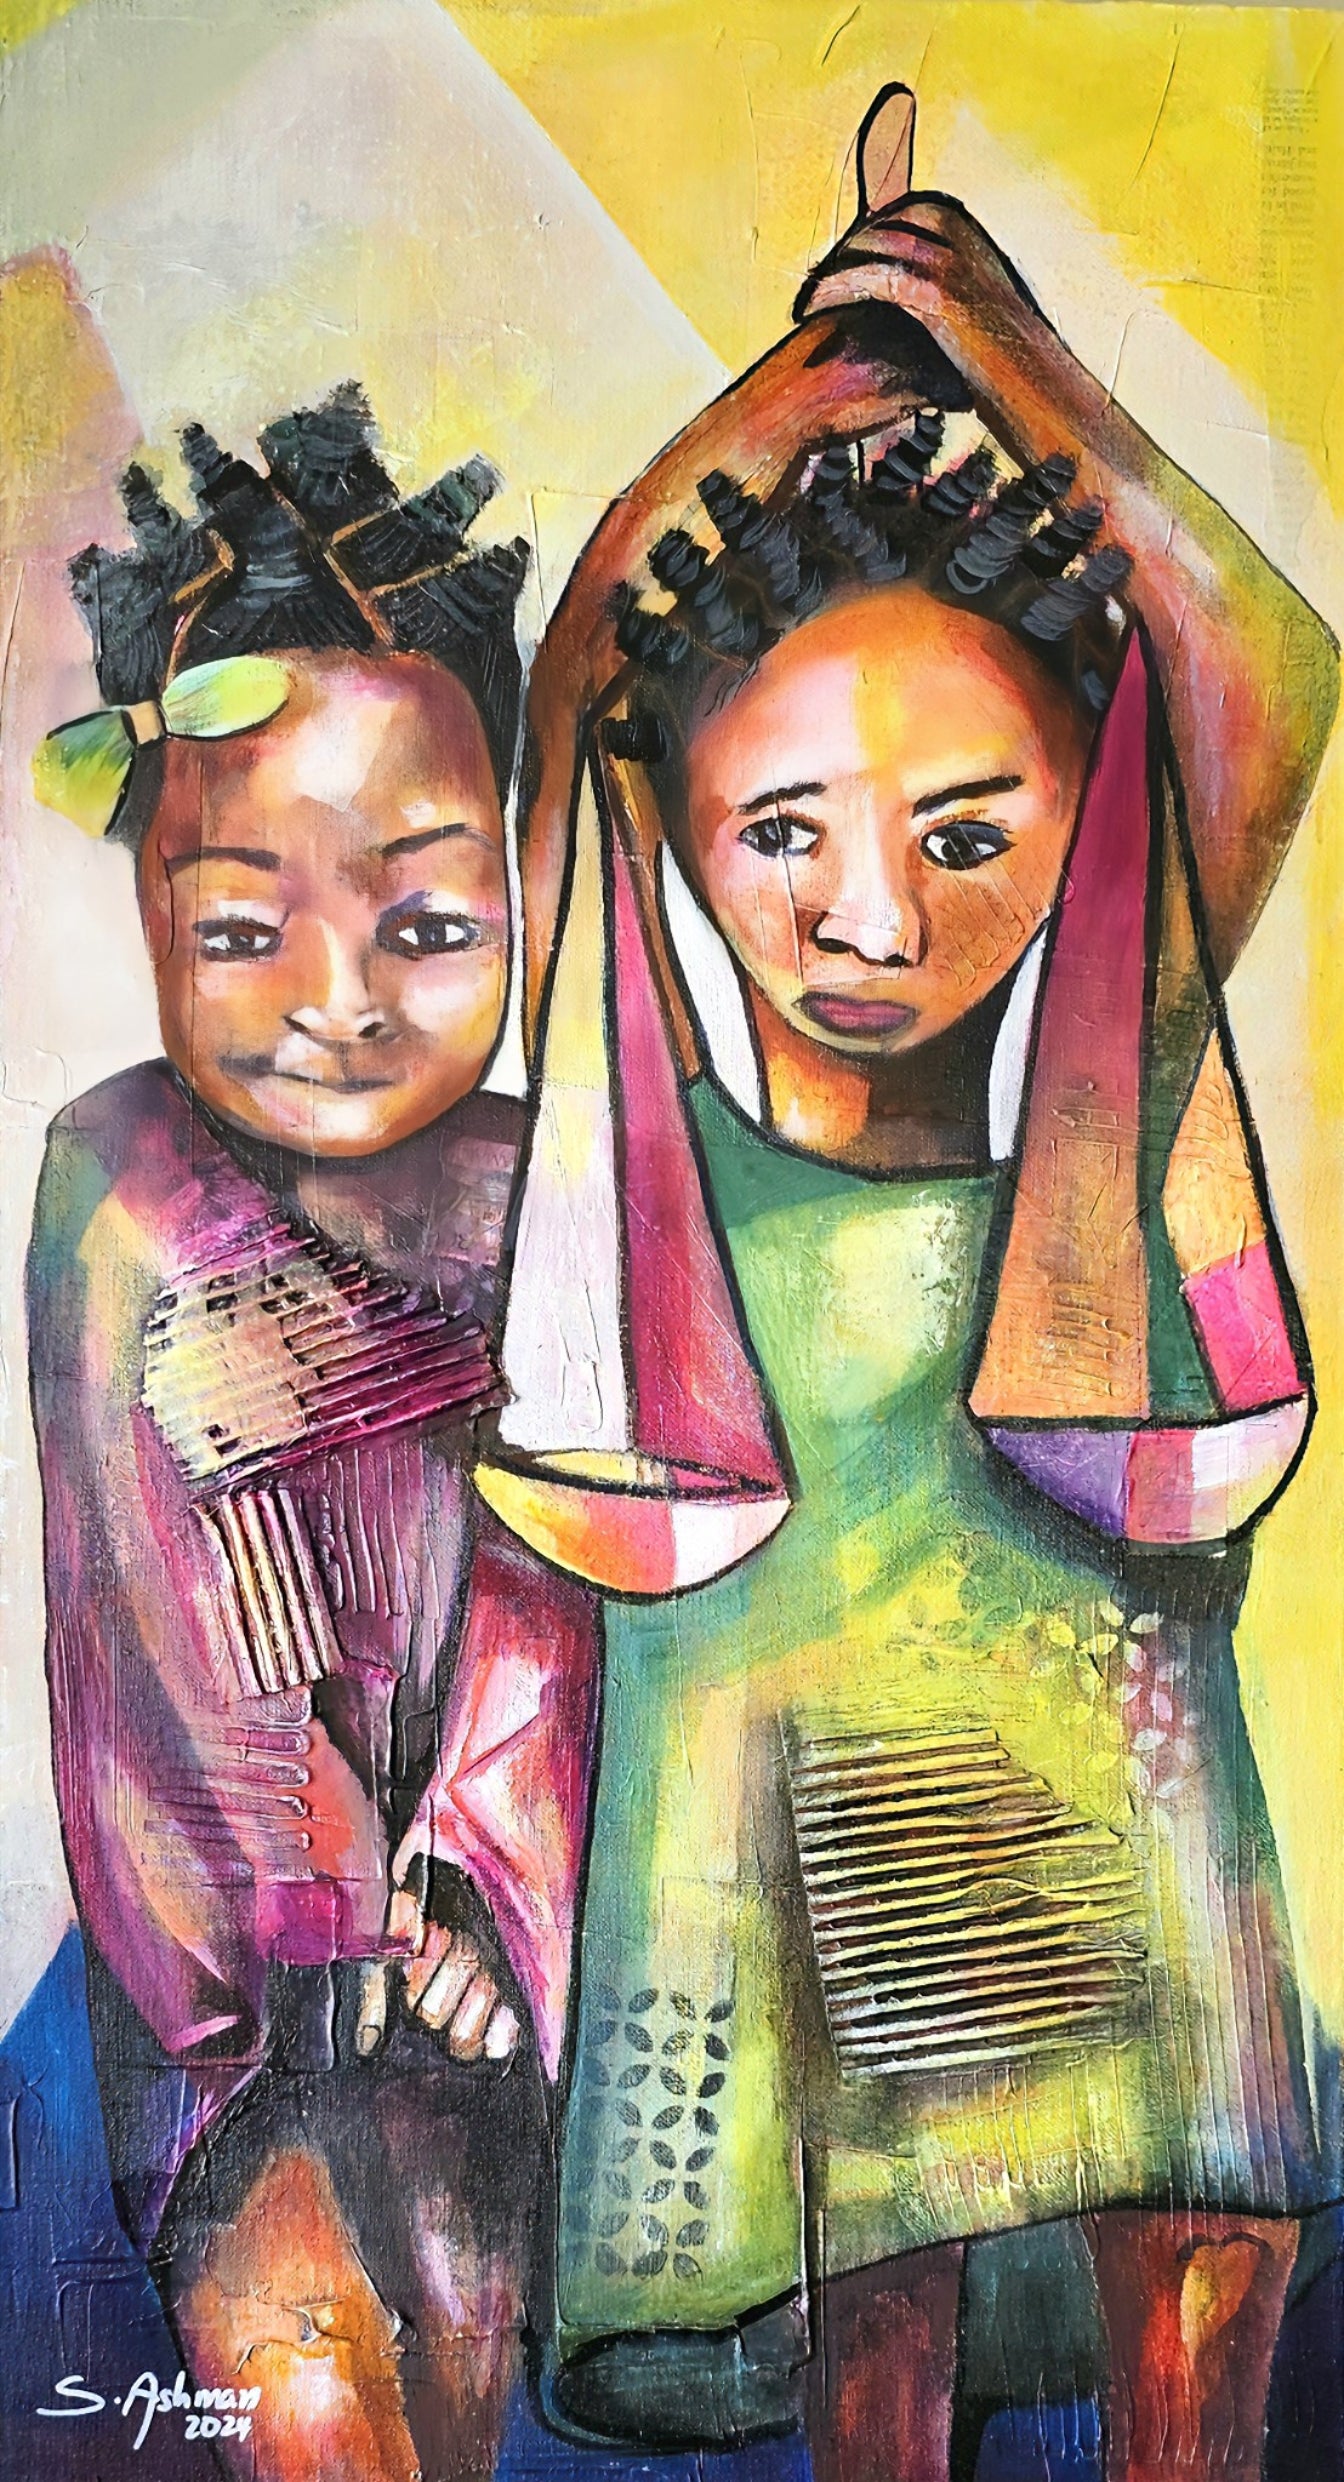 Struggling Sisters by Shawn Ashman